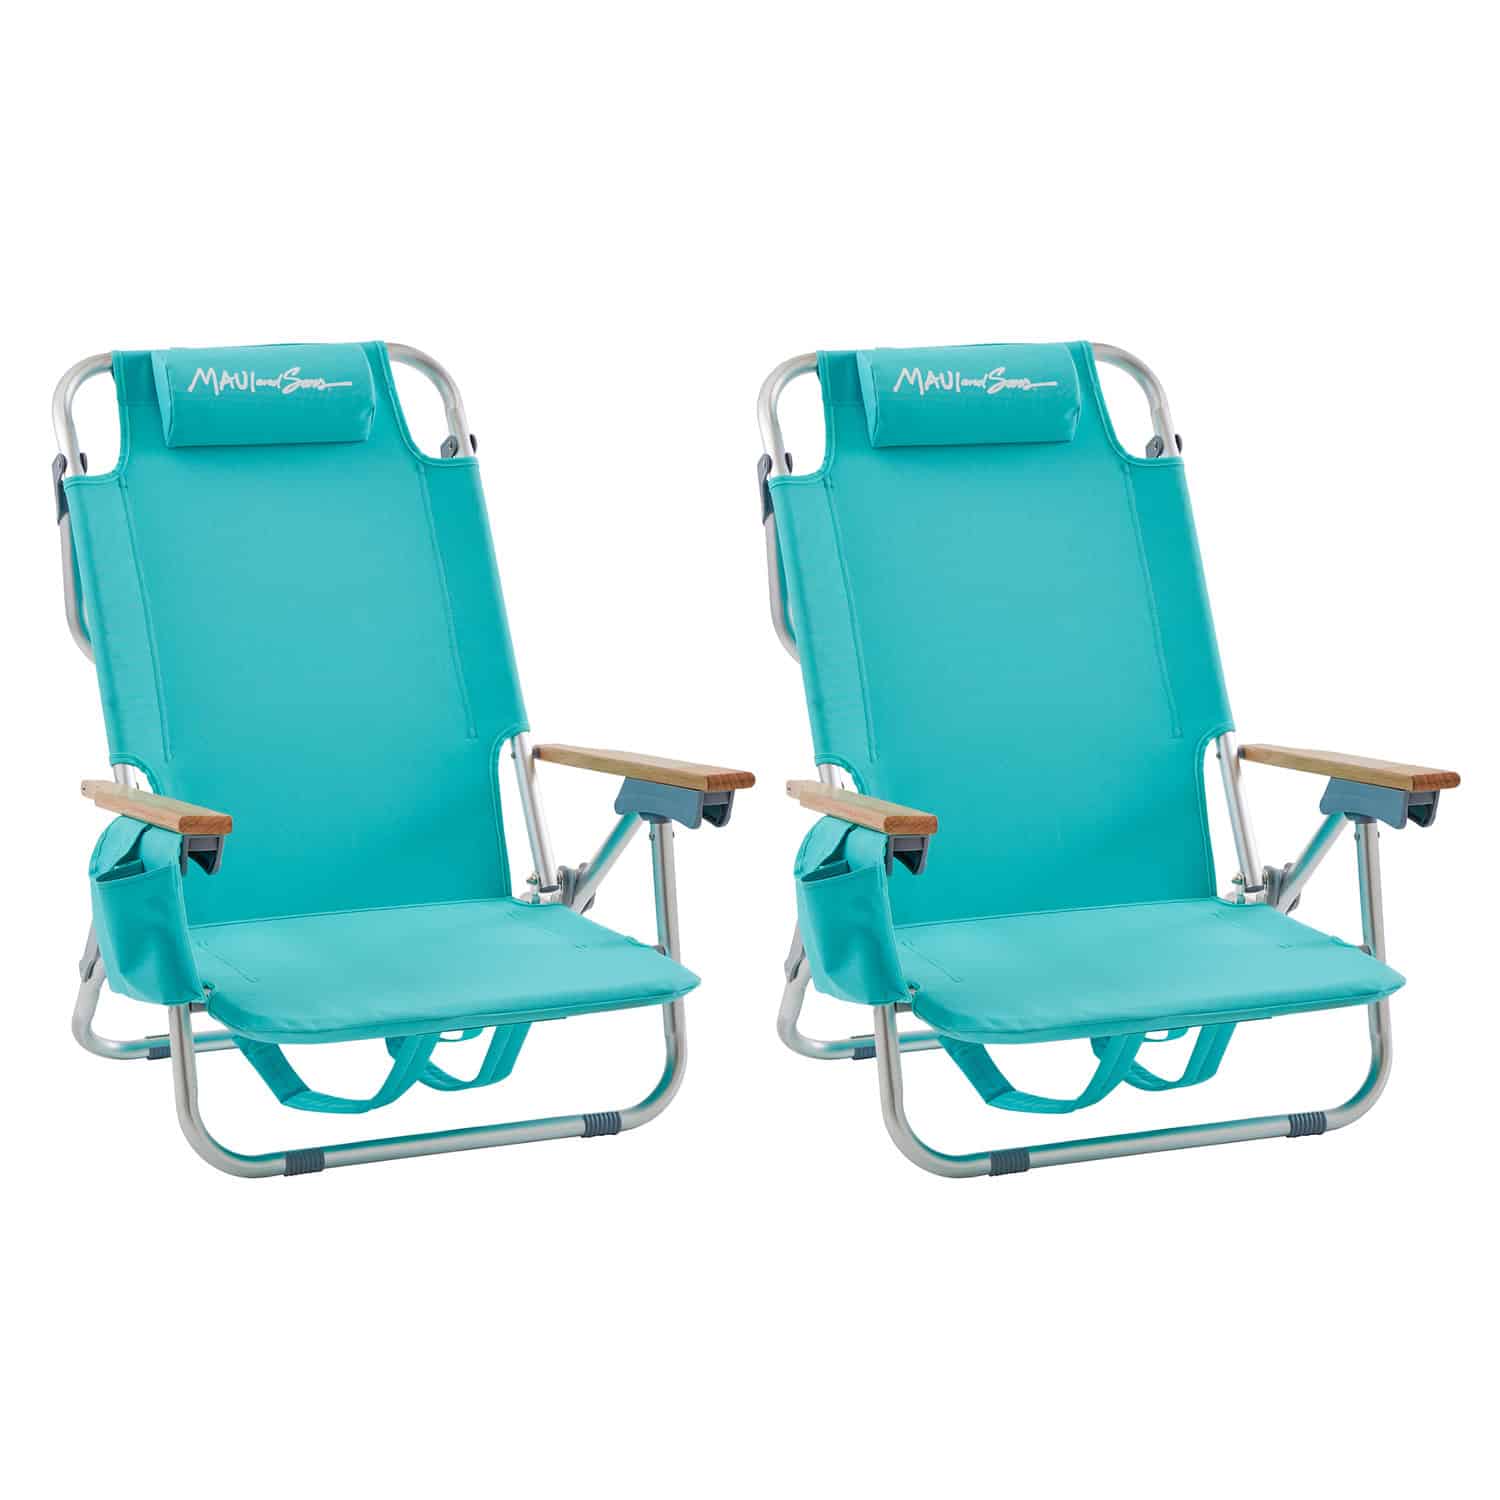 Backpack Chair (Teal, 2 Pack)